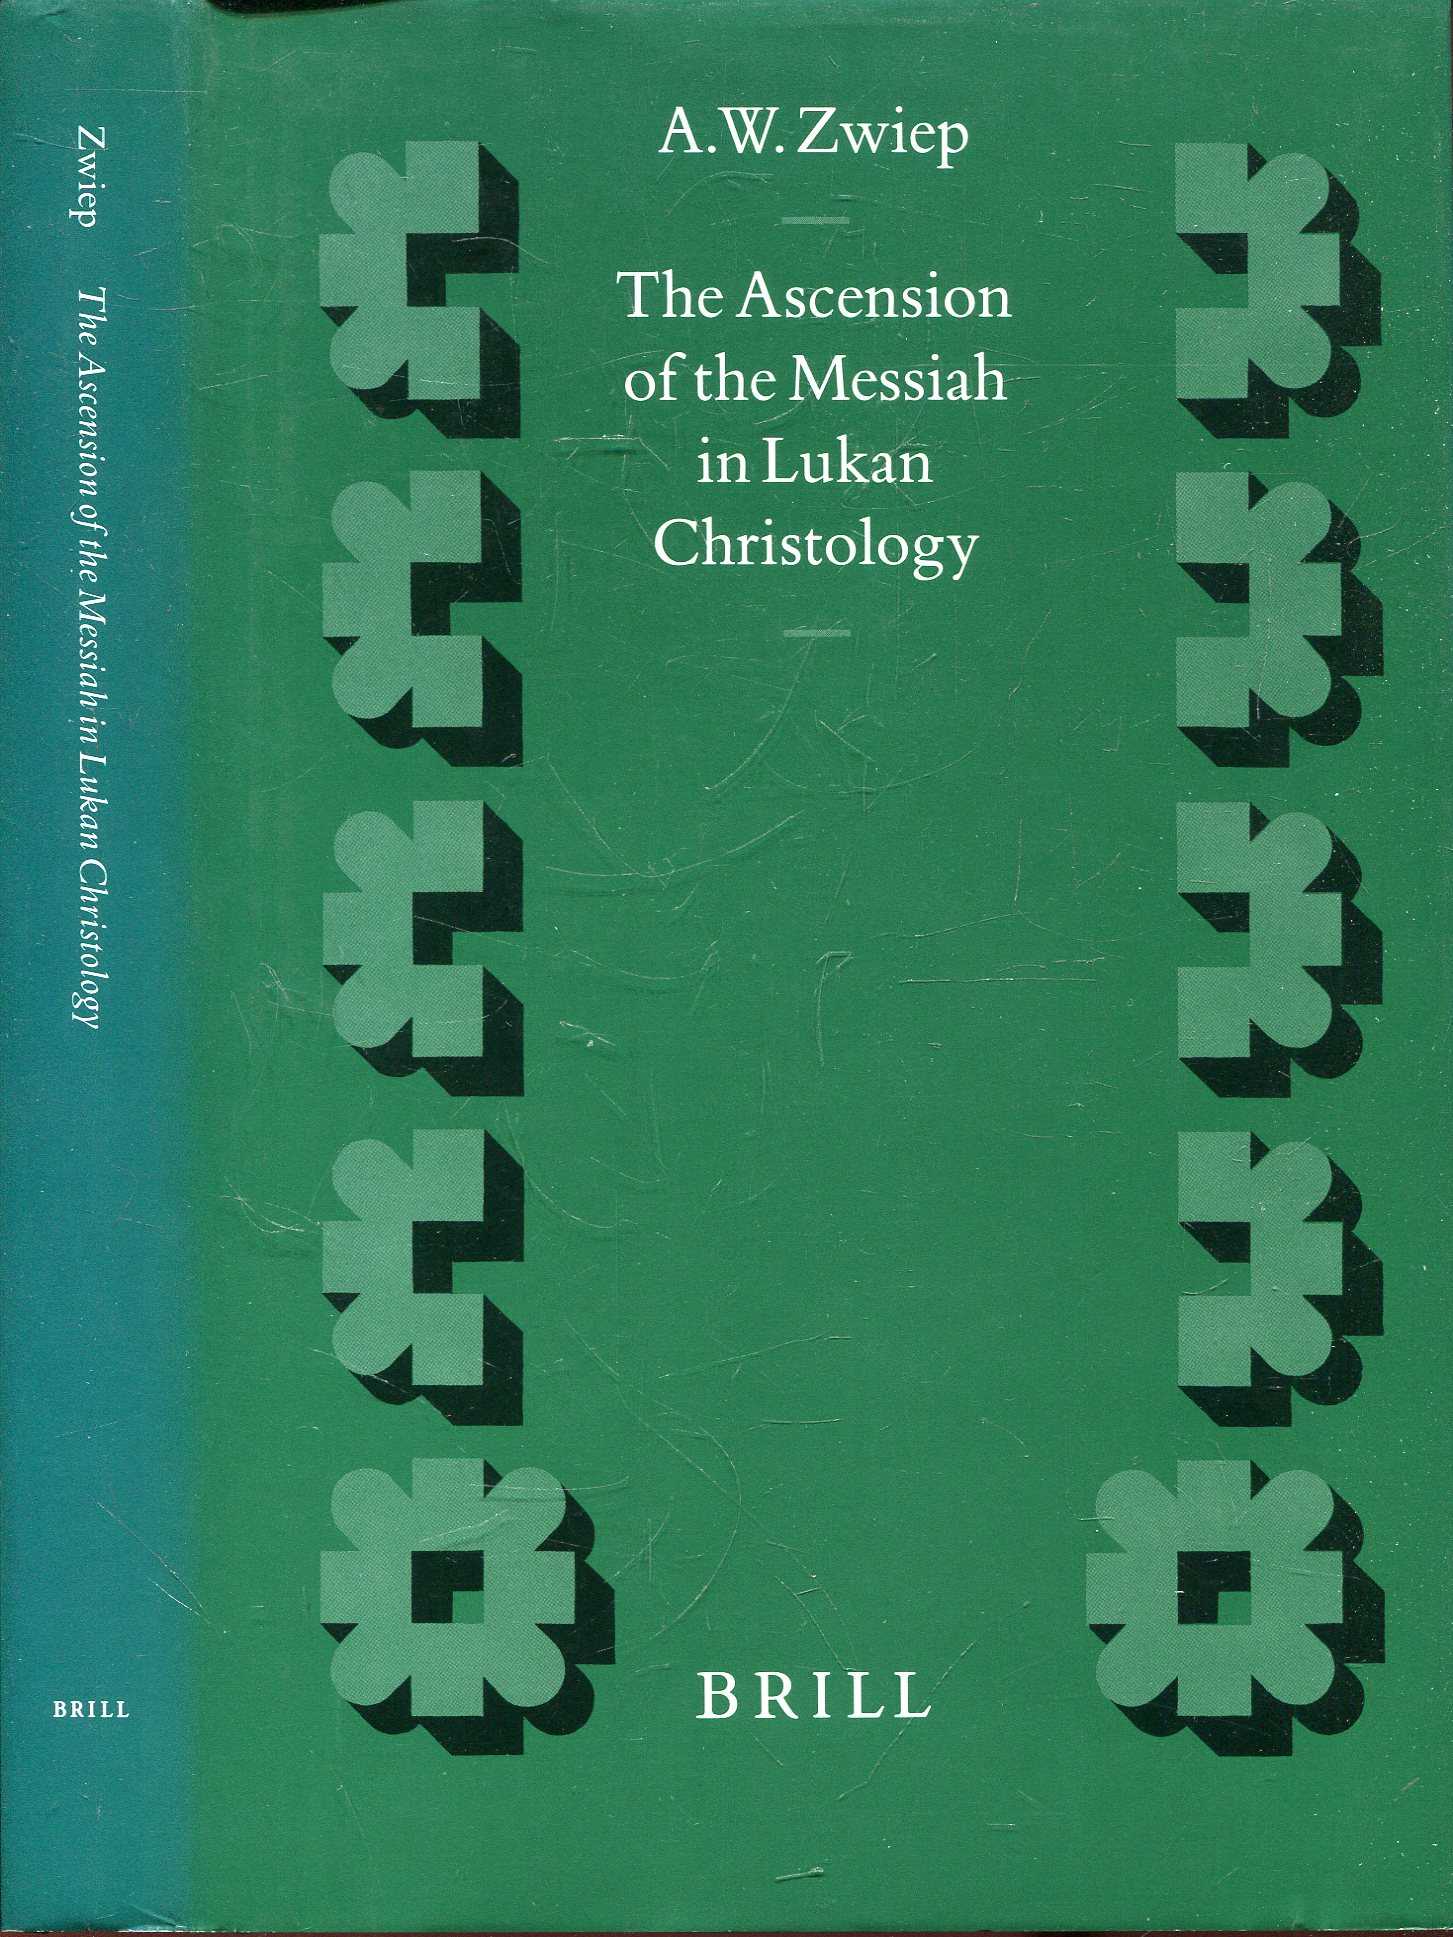 The Ascension of the Messiah in Lukan Christology (Supplements to Novum Testamentum) (Supplements to Novum Testamentum (Brill)) - Zwiep, Arie W